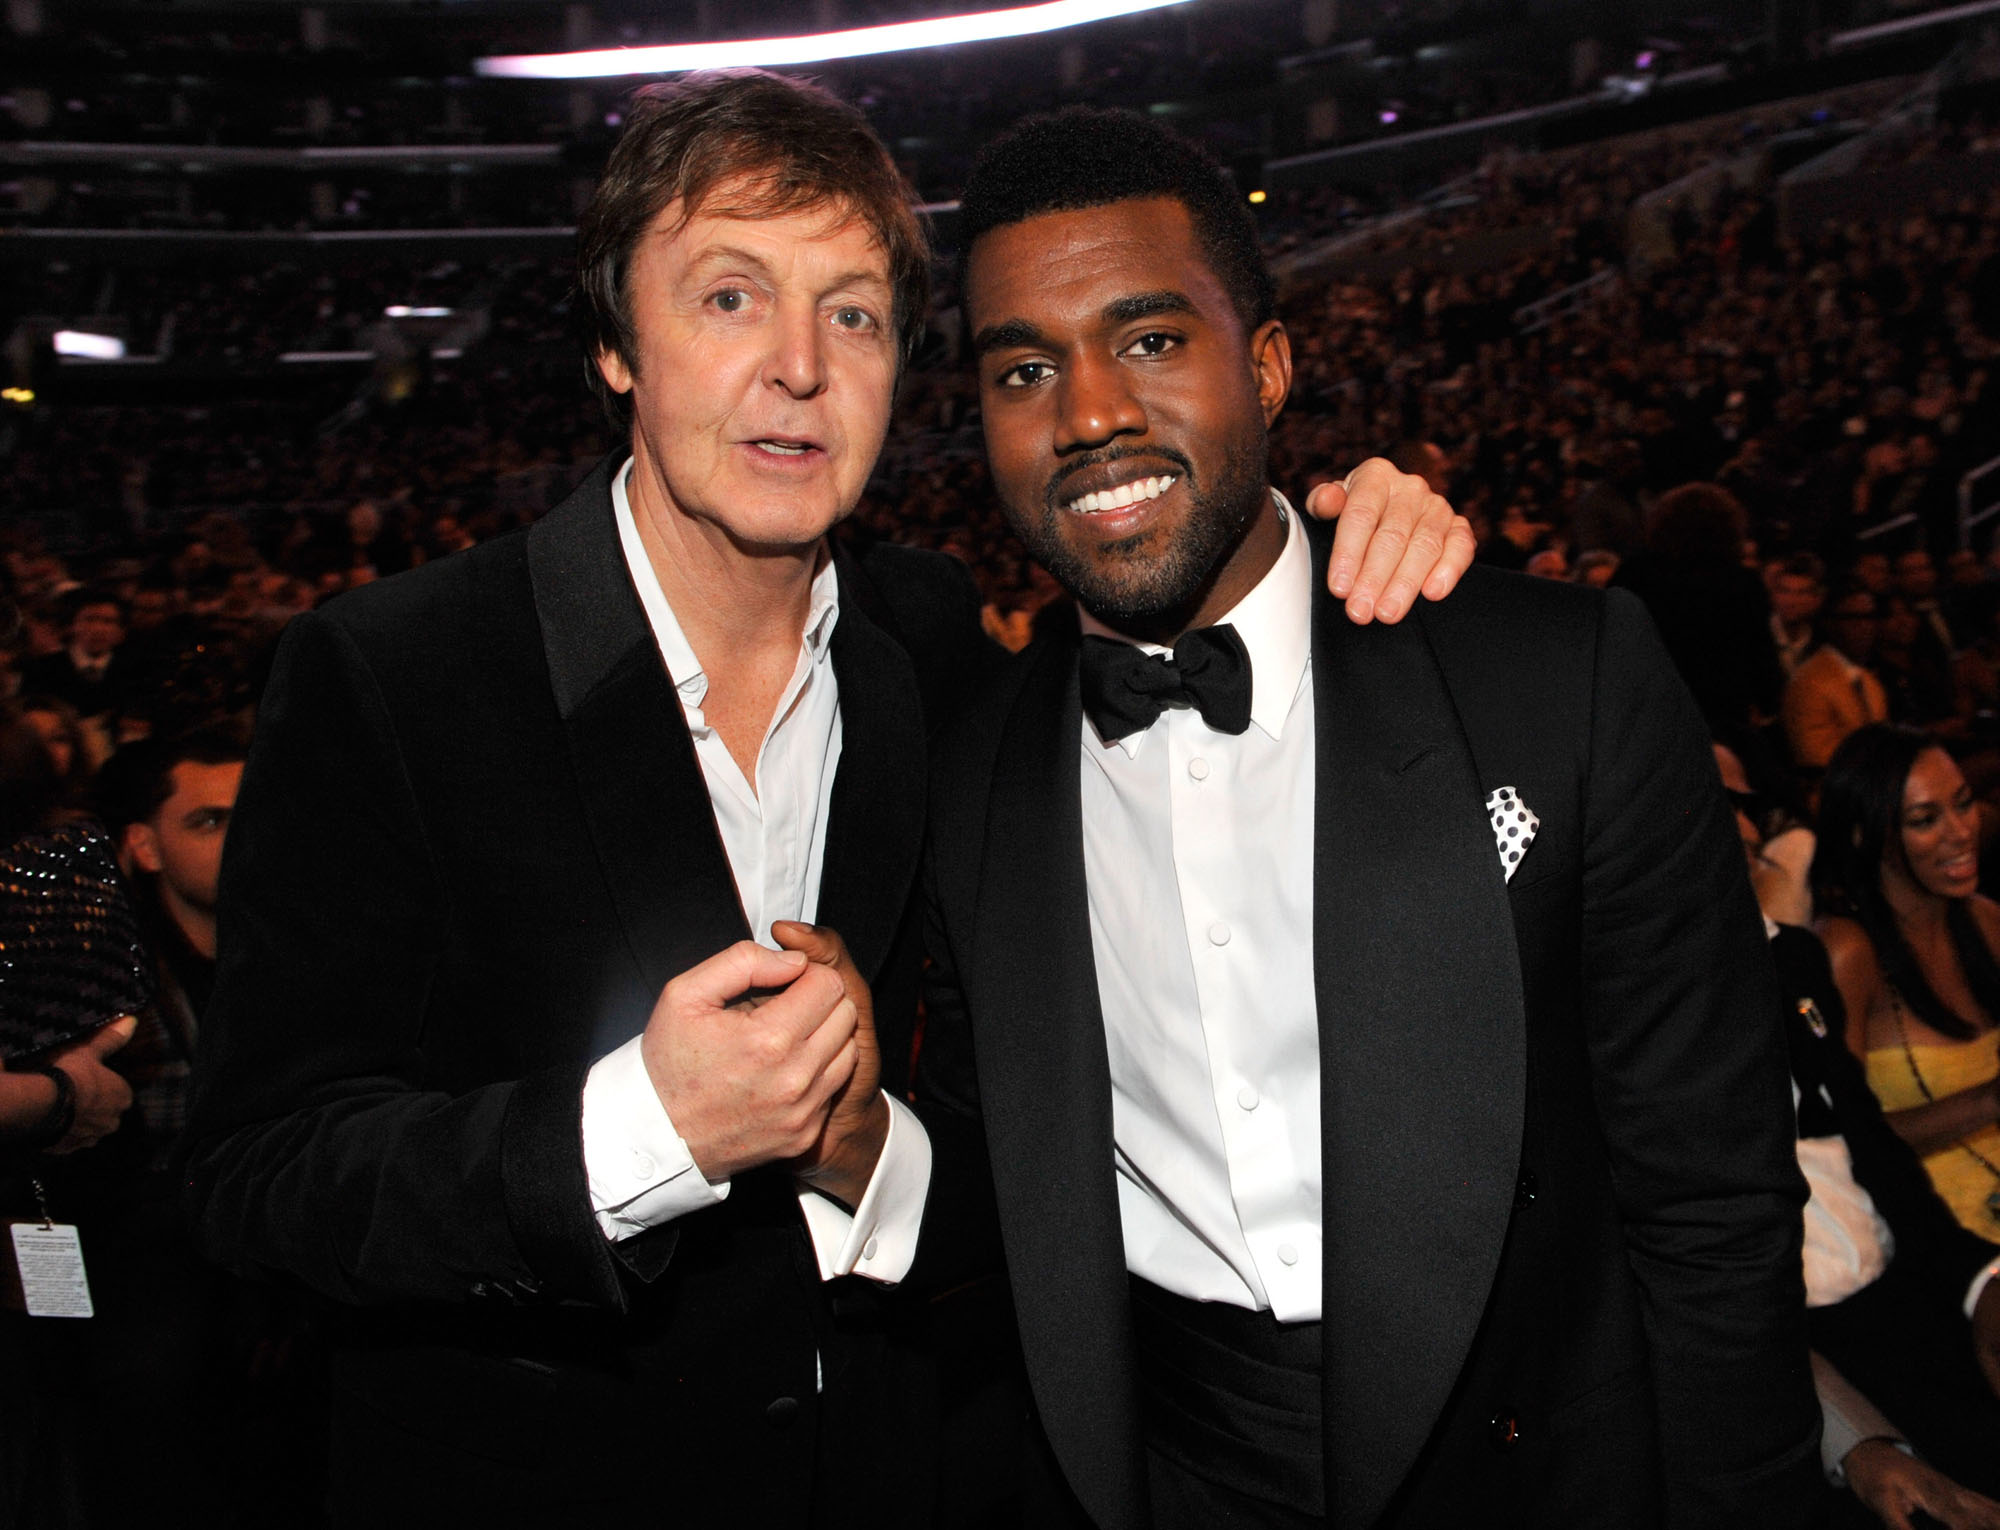 Sir Paul McCartney and Kanye West at the 51st Annual Grammy Awards at the Staples Center in Los Angeles on Feb. 8, 2009.